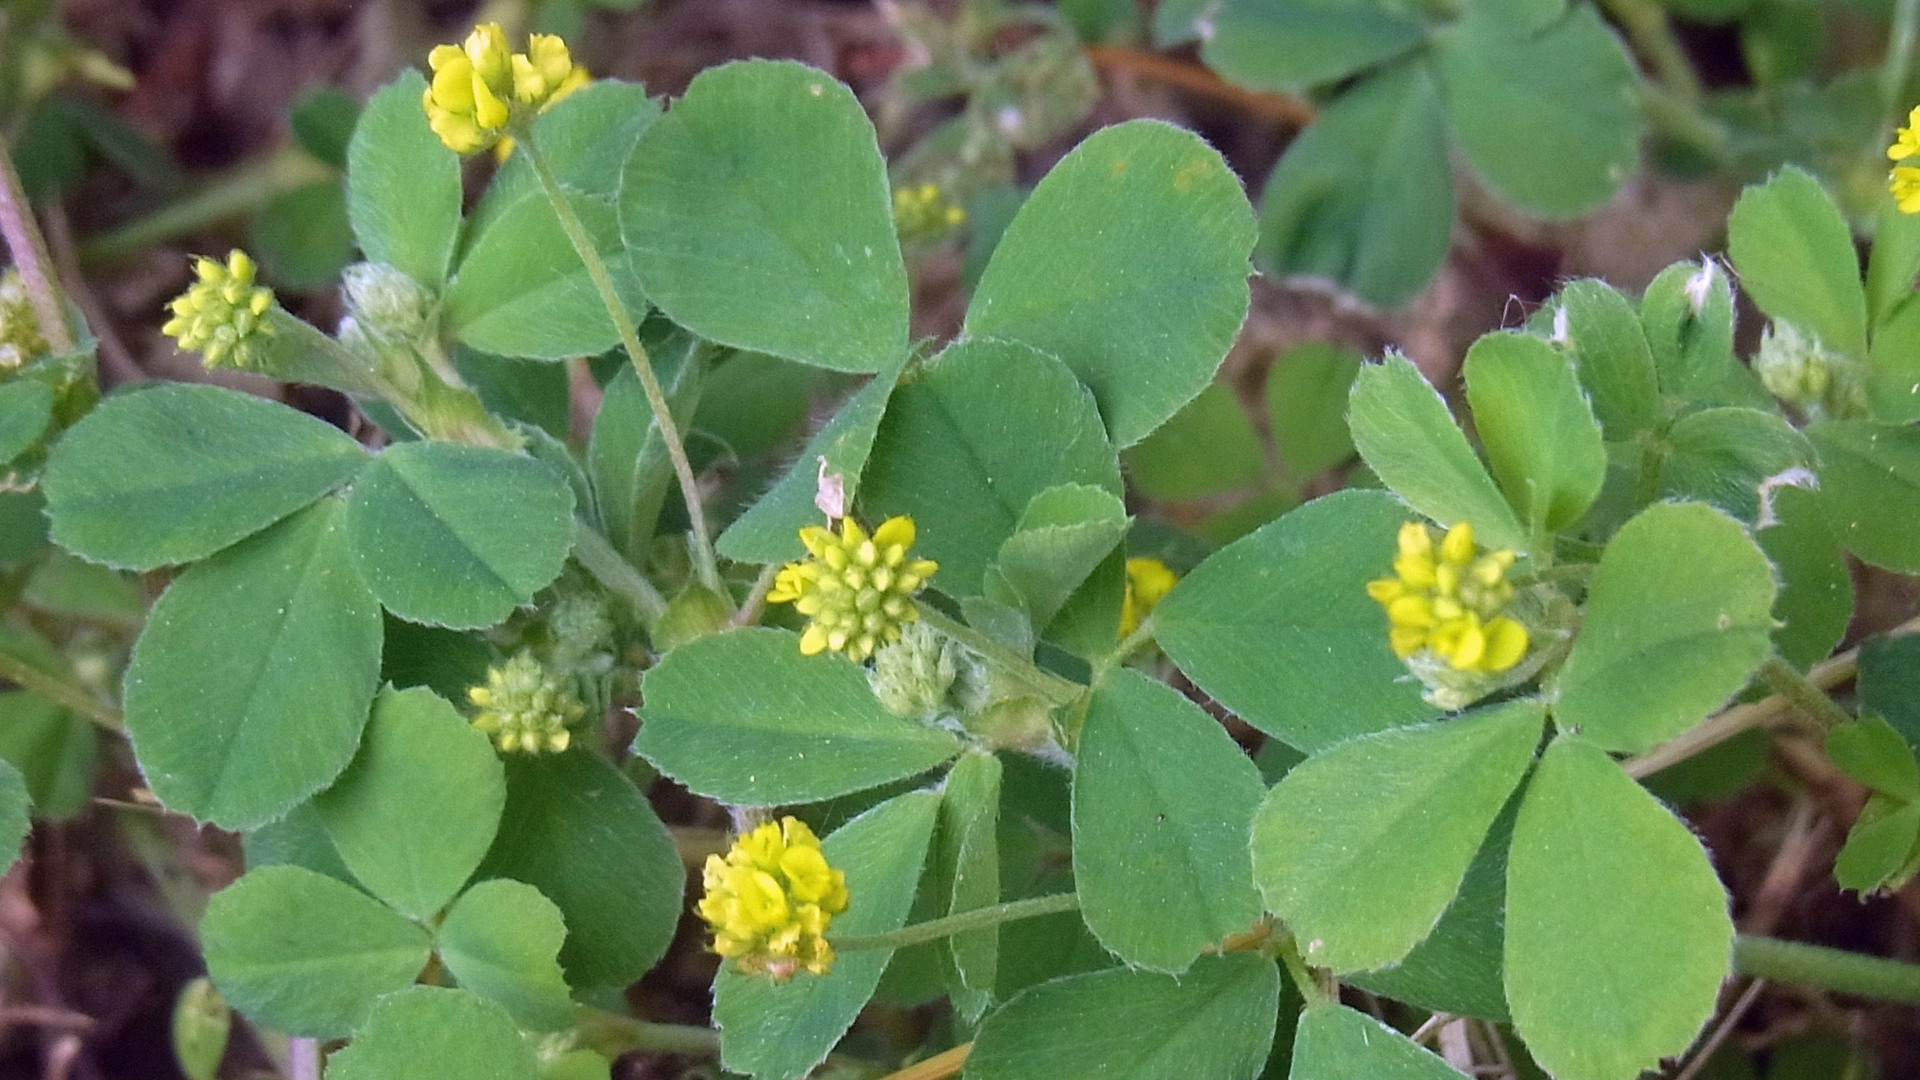 Black Medic: What This Weed Looks Like & How to Prevent & Control It